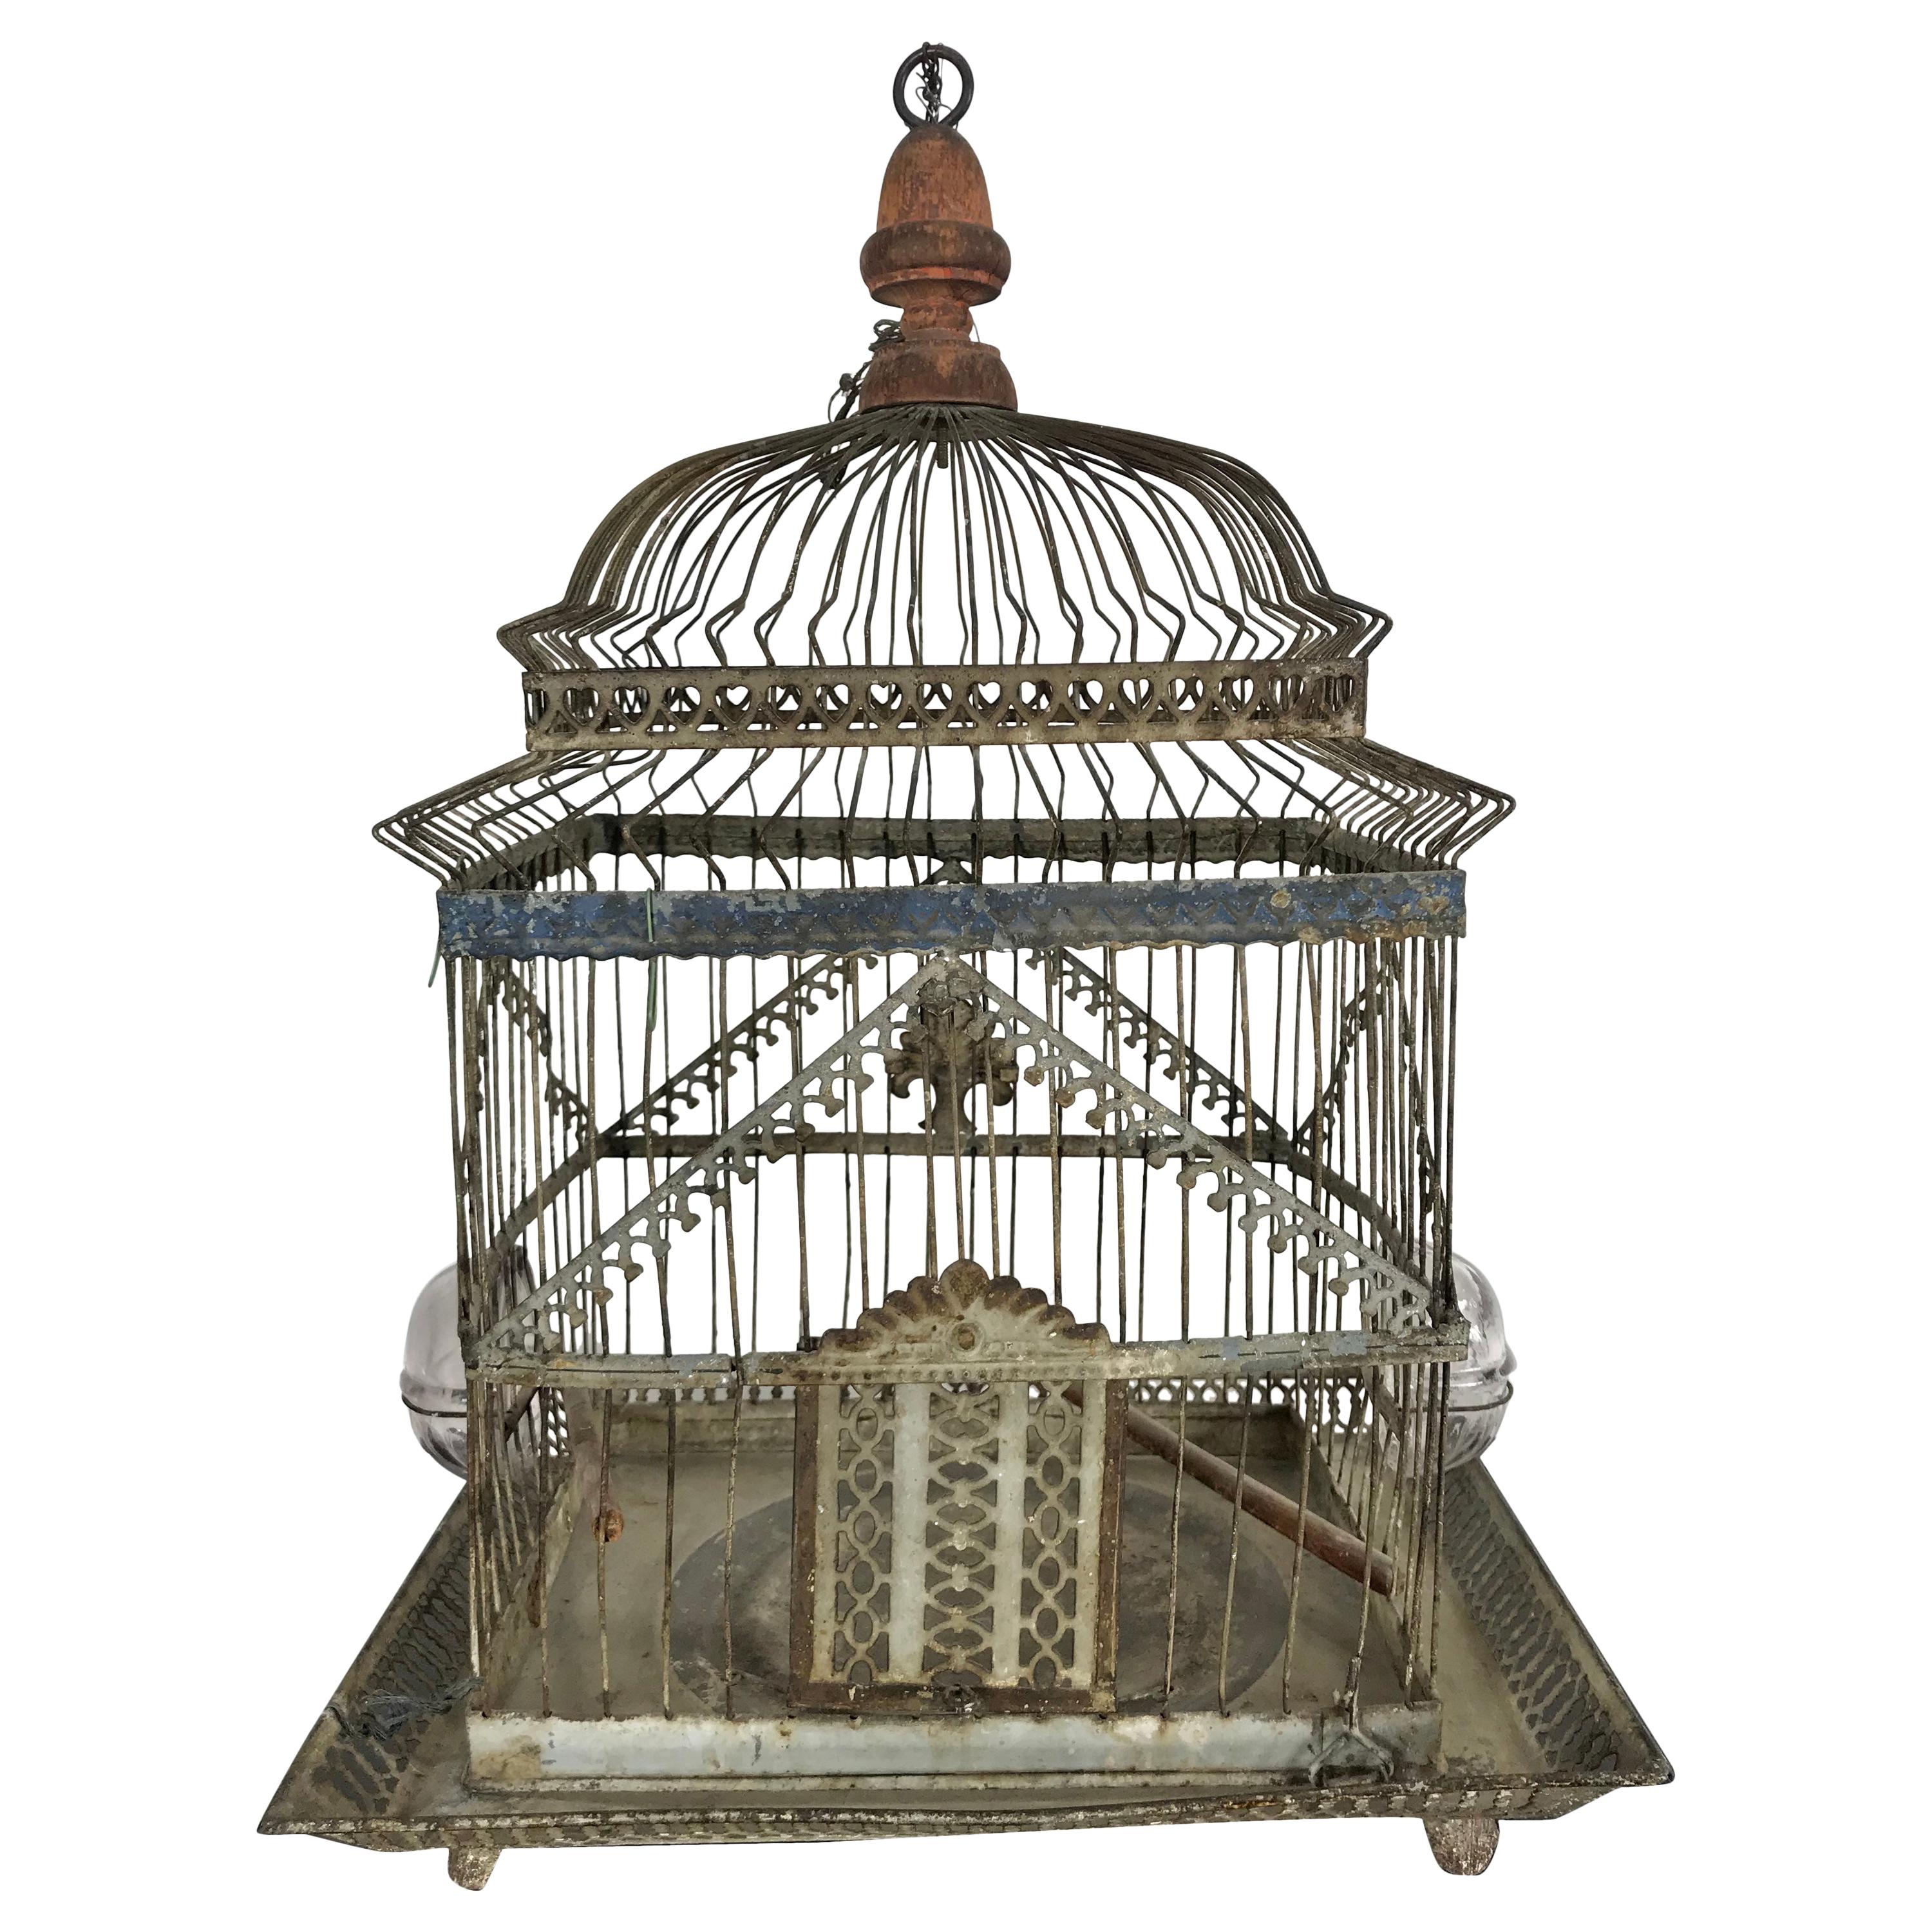 Charming 19th Century Architectural Birdcage